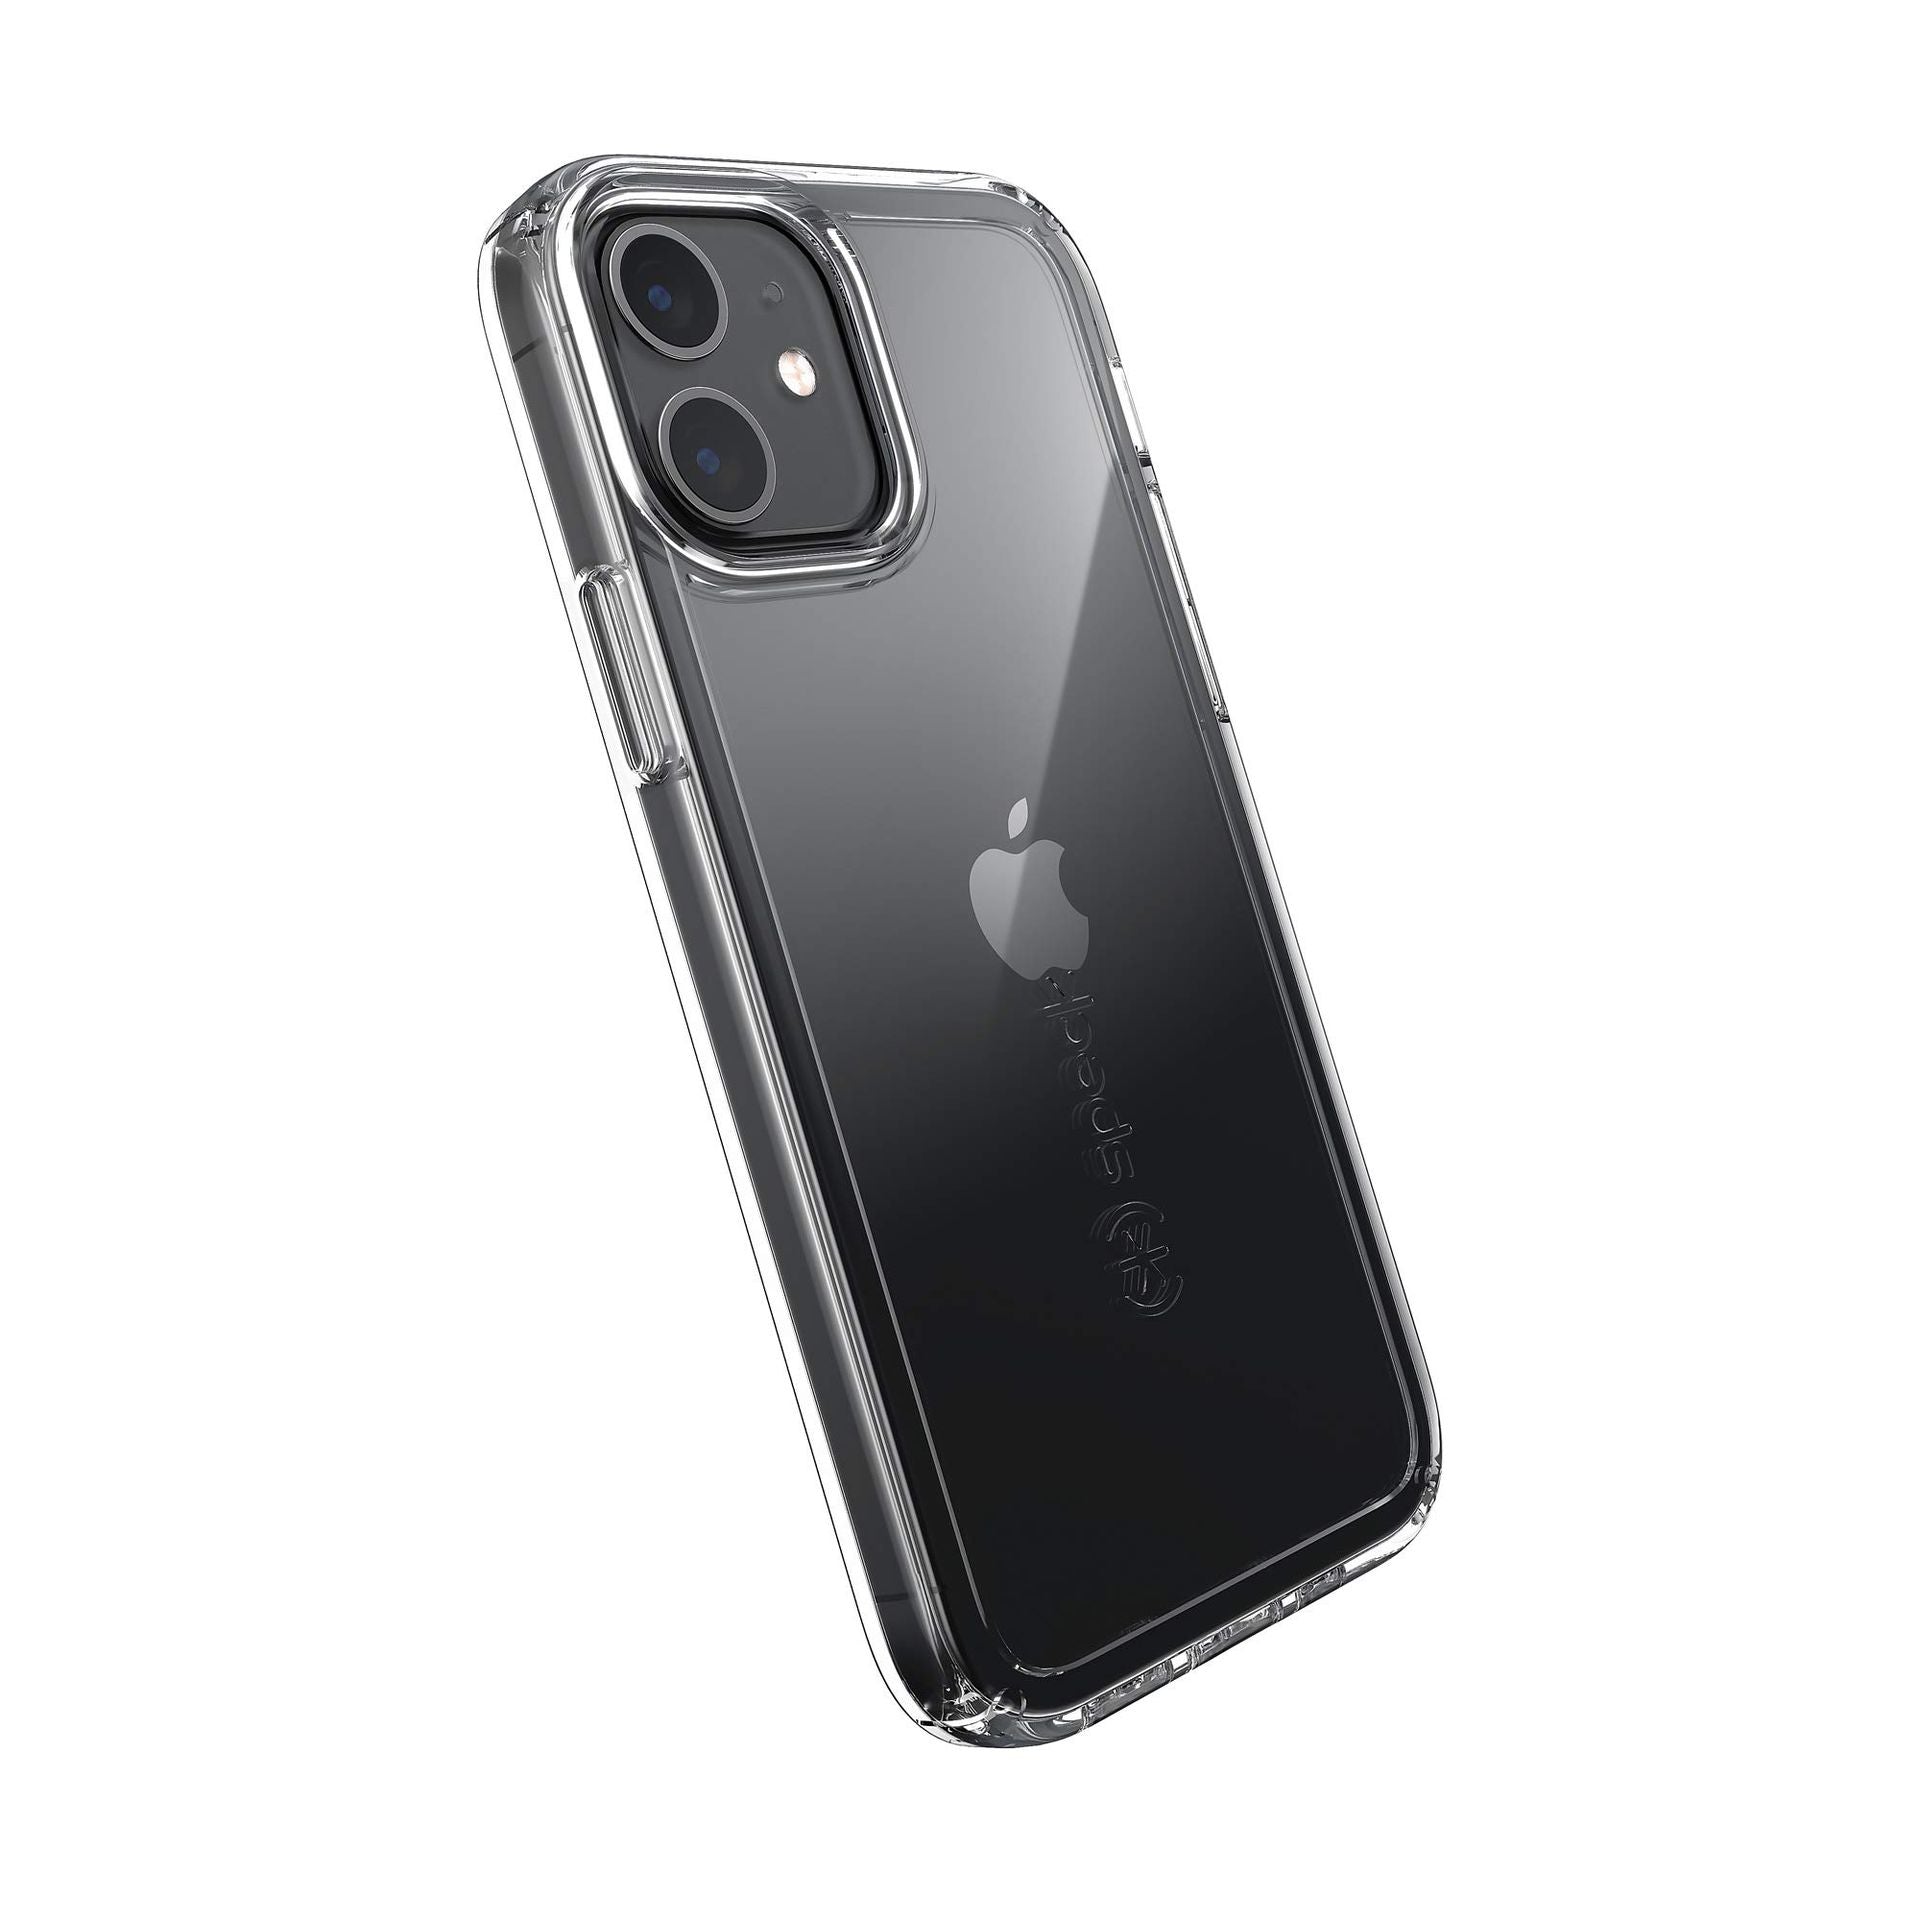 Speck Iphone 12 Clear Case Drop Protection Fits Iphone 12 Pro Case & Iphone 12 Phones Scratch Resistant, Anti-Yellowing & Anti-Fade With Slim Design 6.1 Inch Gemshell